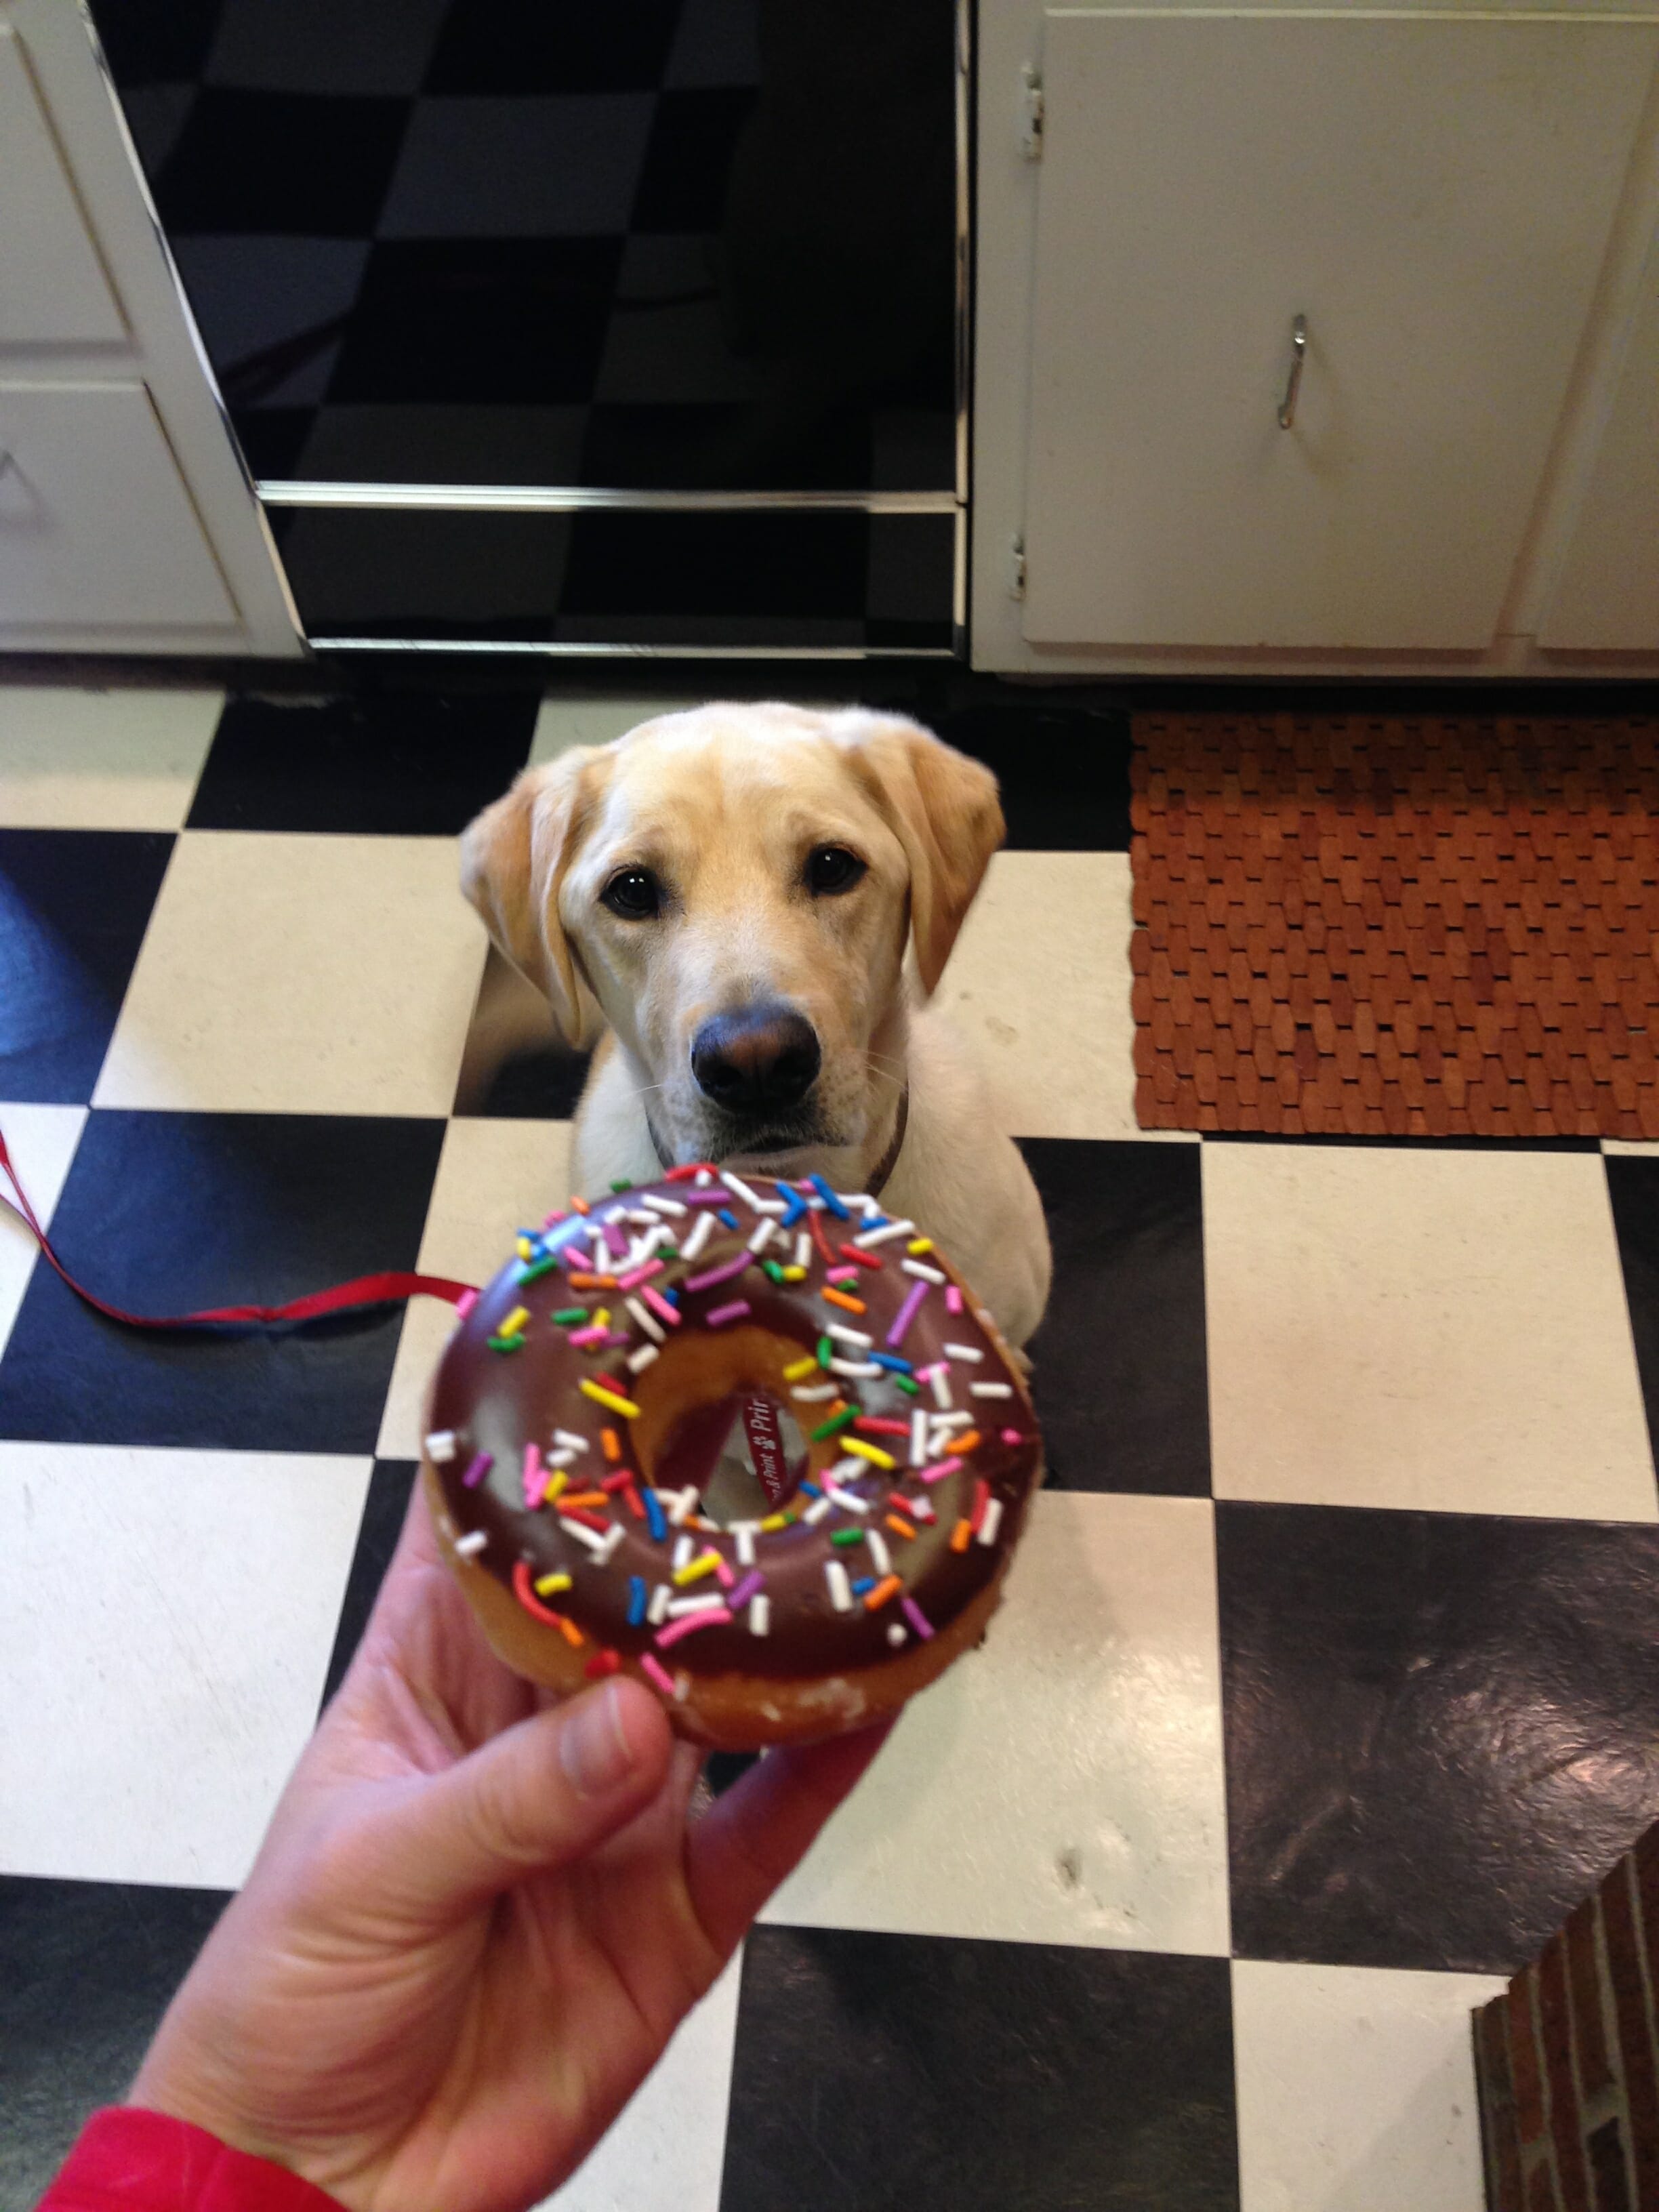 Dog and donut